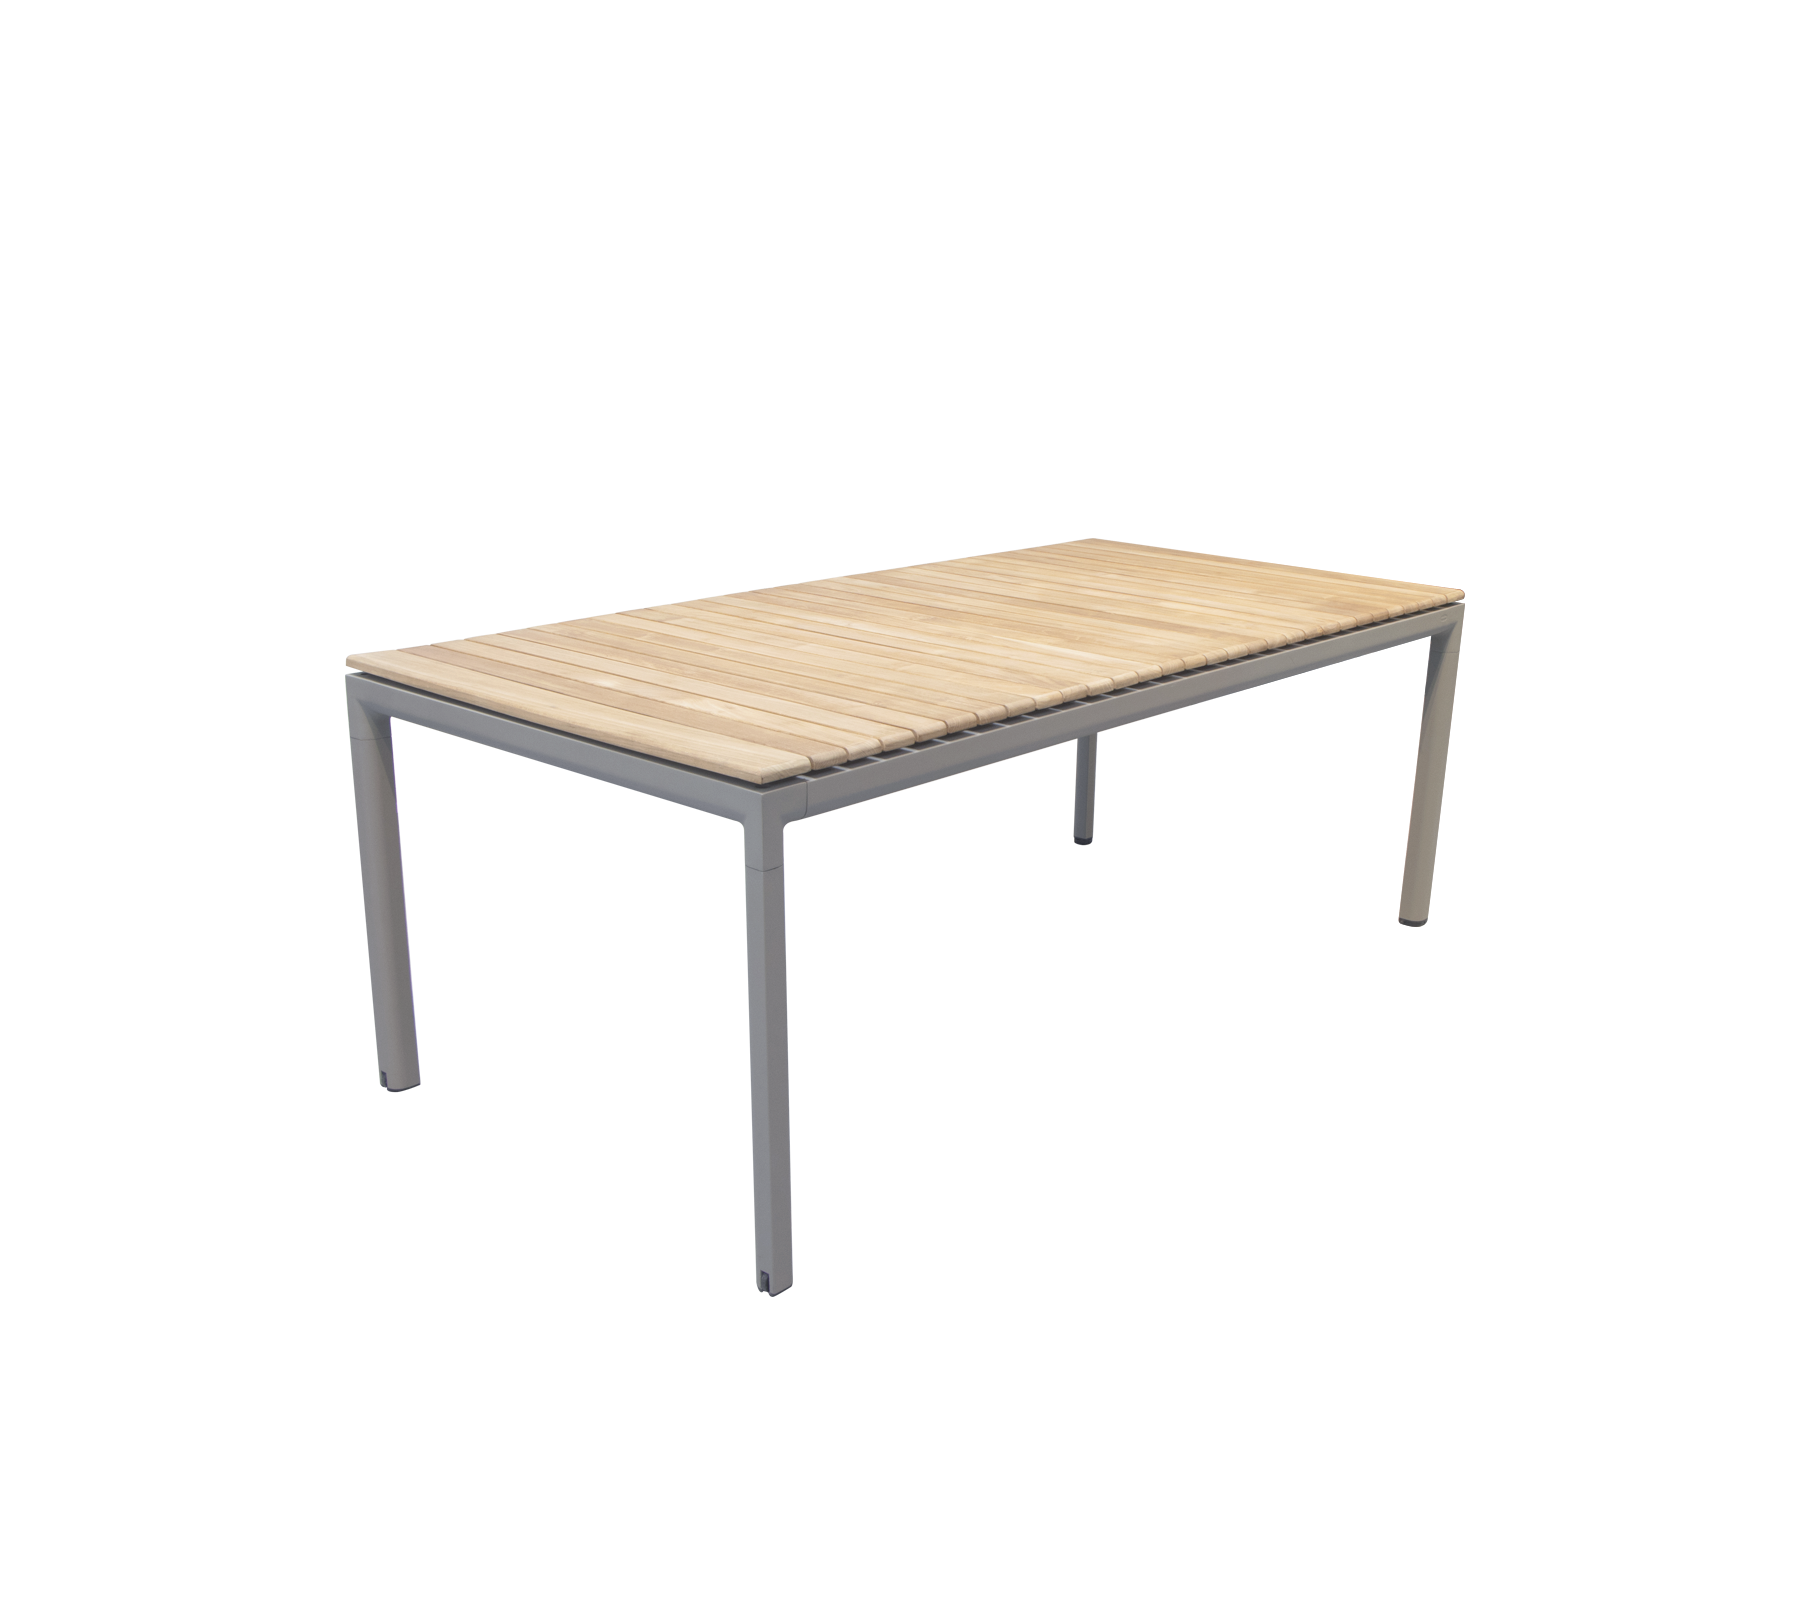 Drop dining table w/120 cm extension